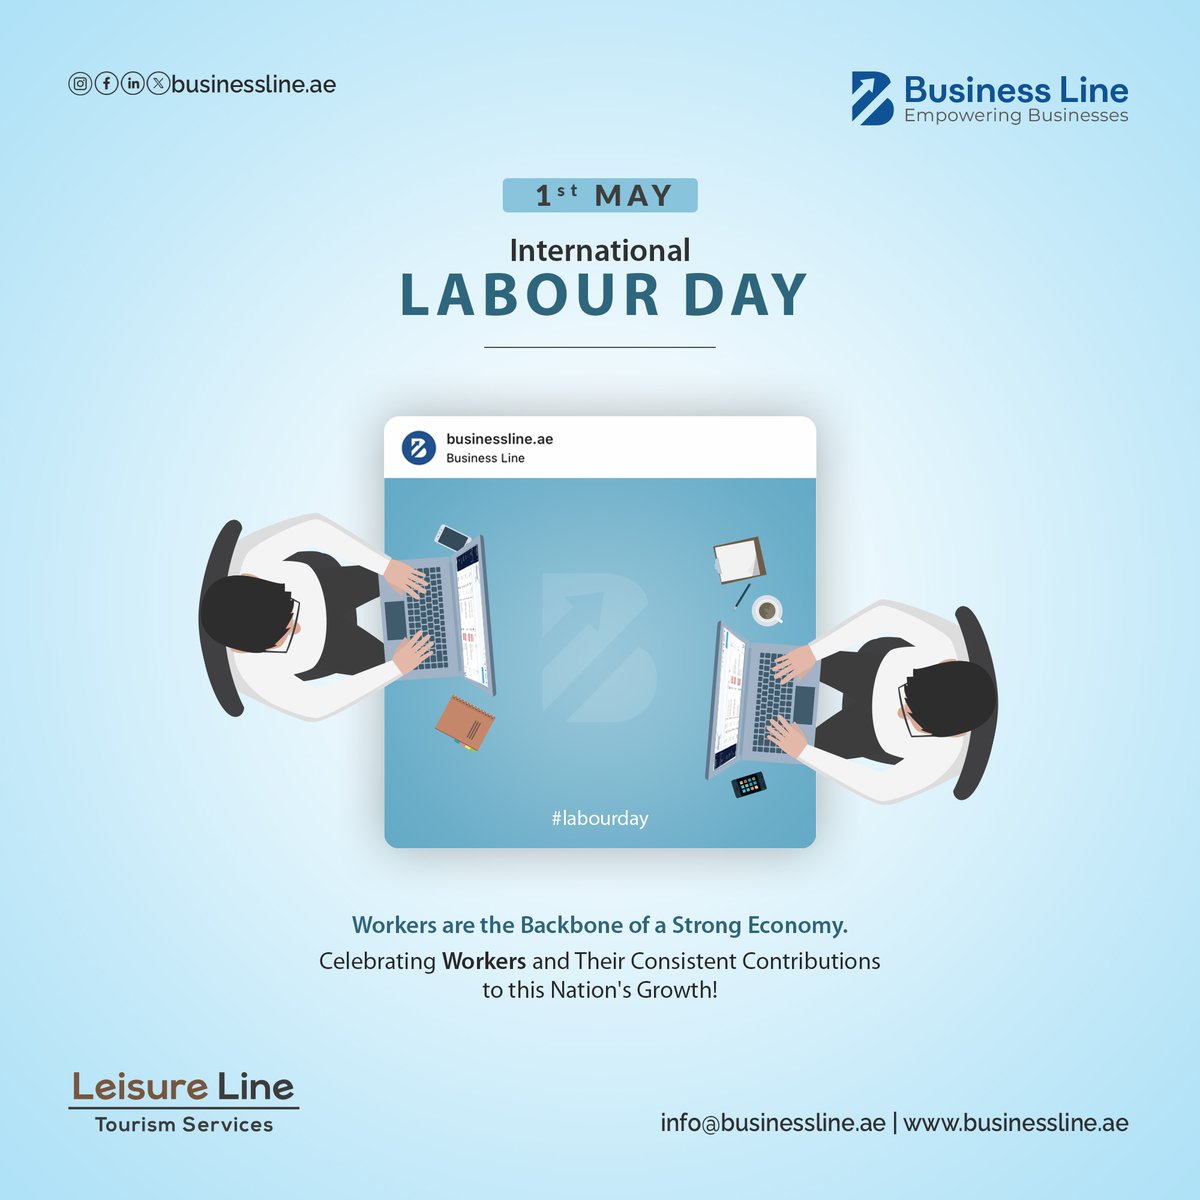 Celebrating Workers and Their Consistent Contributions to this Nation’s Growth. International Labour Day!

#labourday #internationallabourday #workersday #businessline